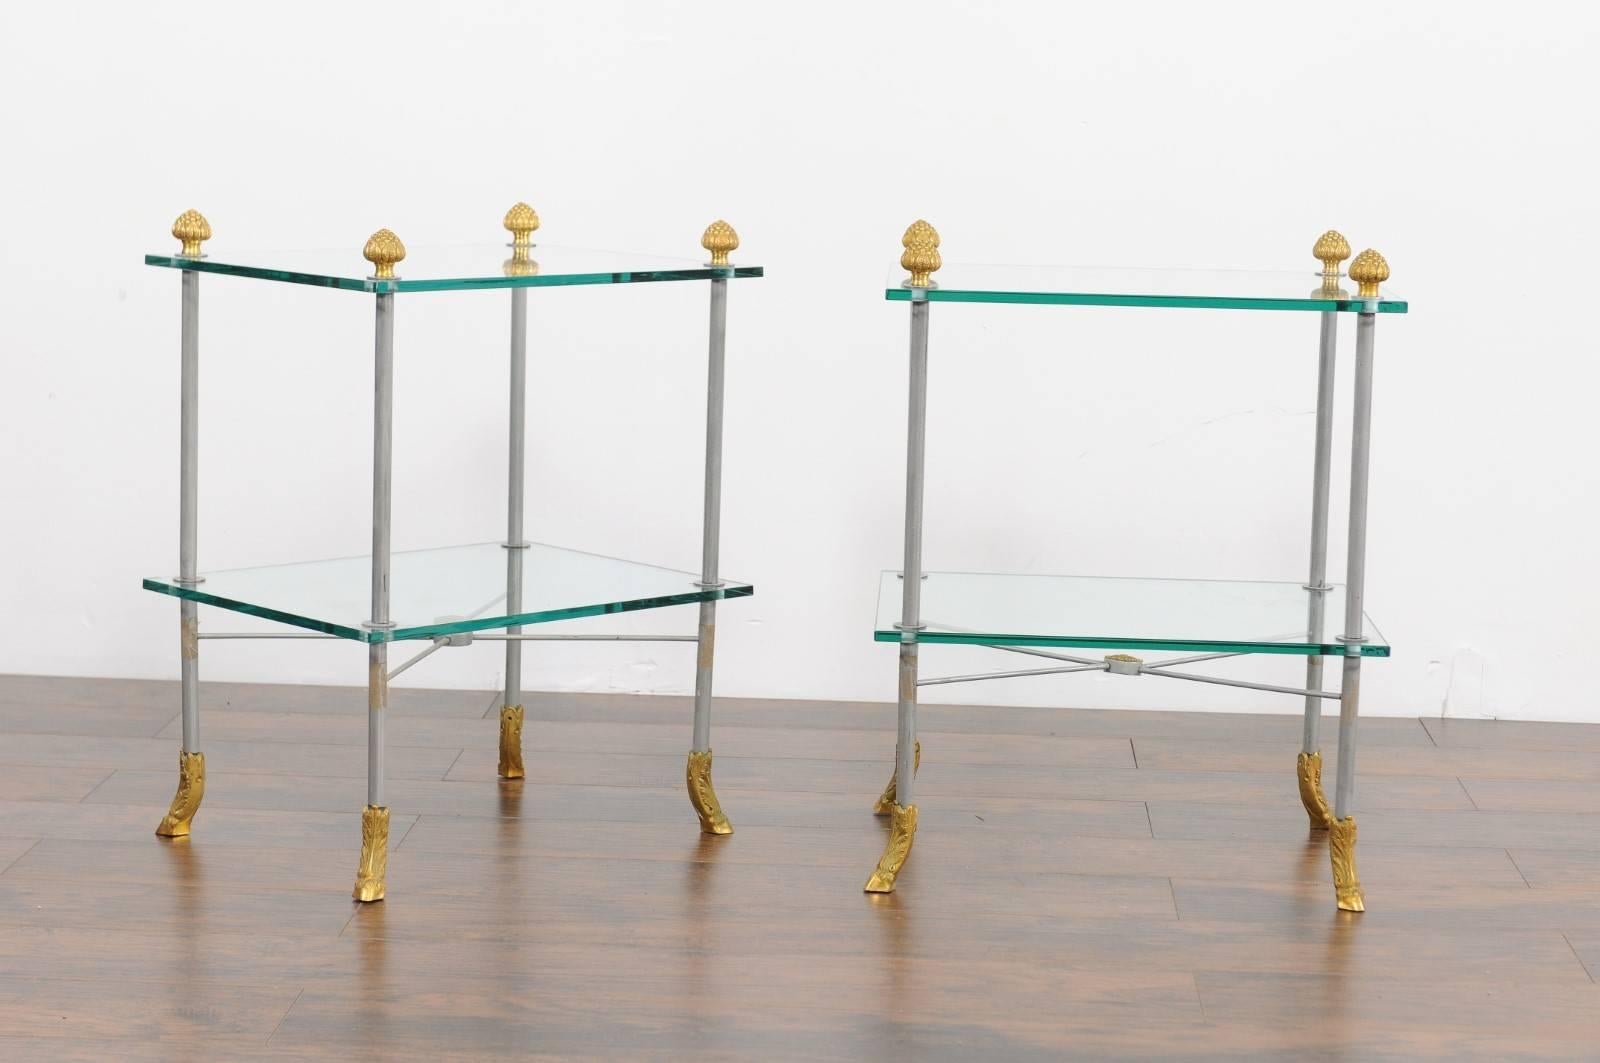 Pair of French vintage steel and brass tiered side tables from the mid-20th century with glass shelves and hoofed feet. Each of this pair of French side tables features a simple steel structure made of four straight legs, accented with brass